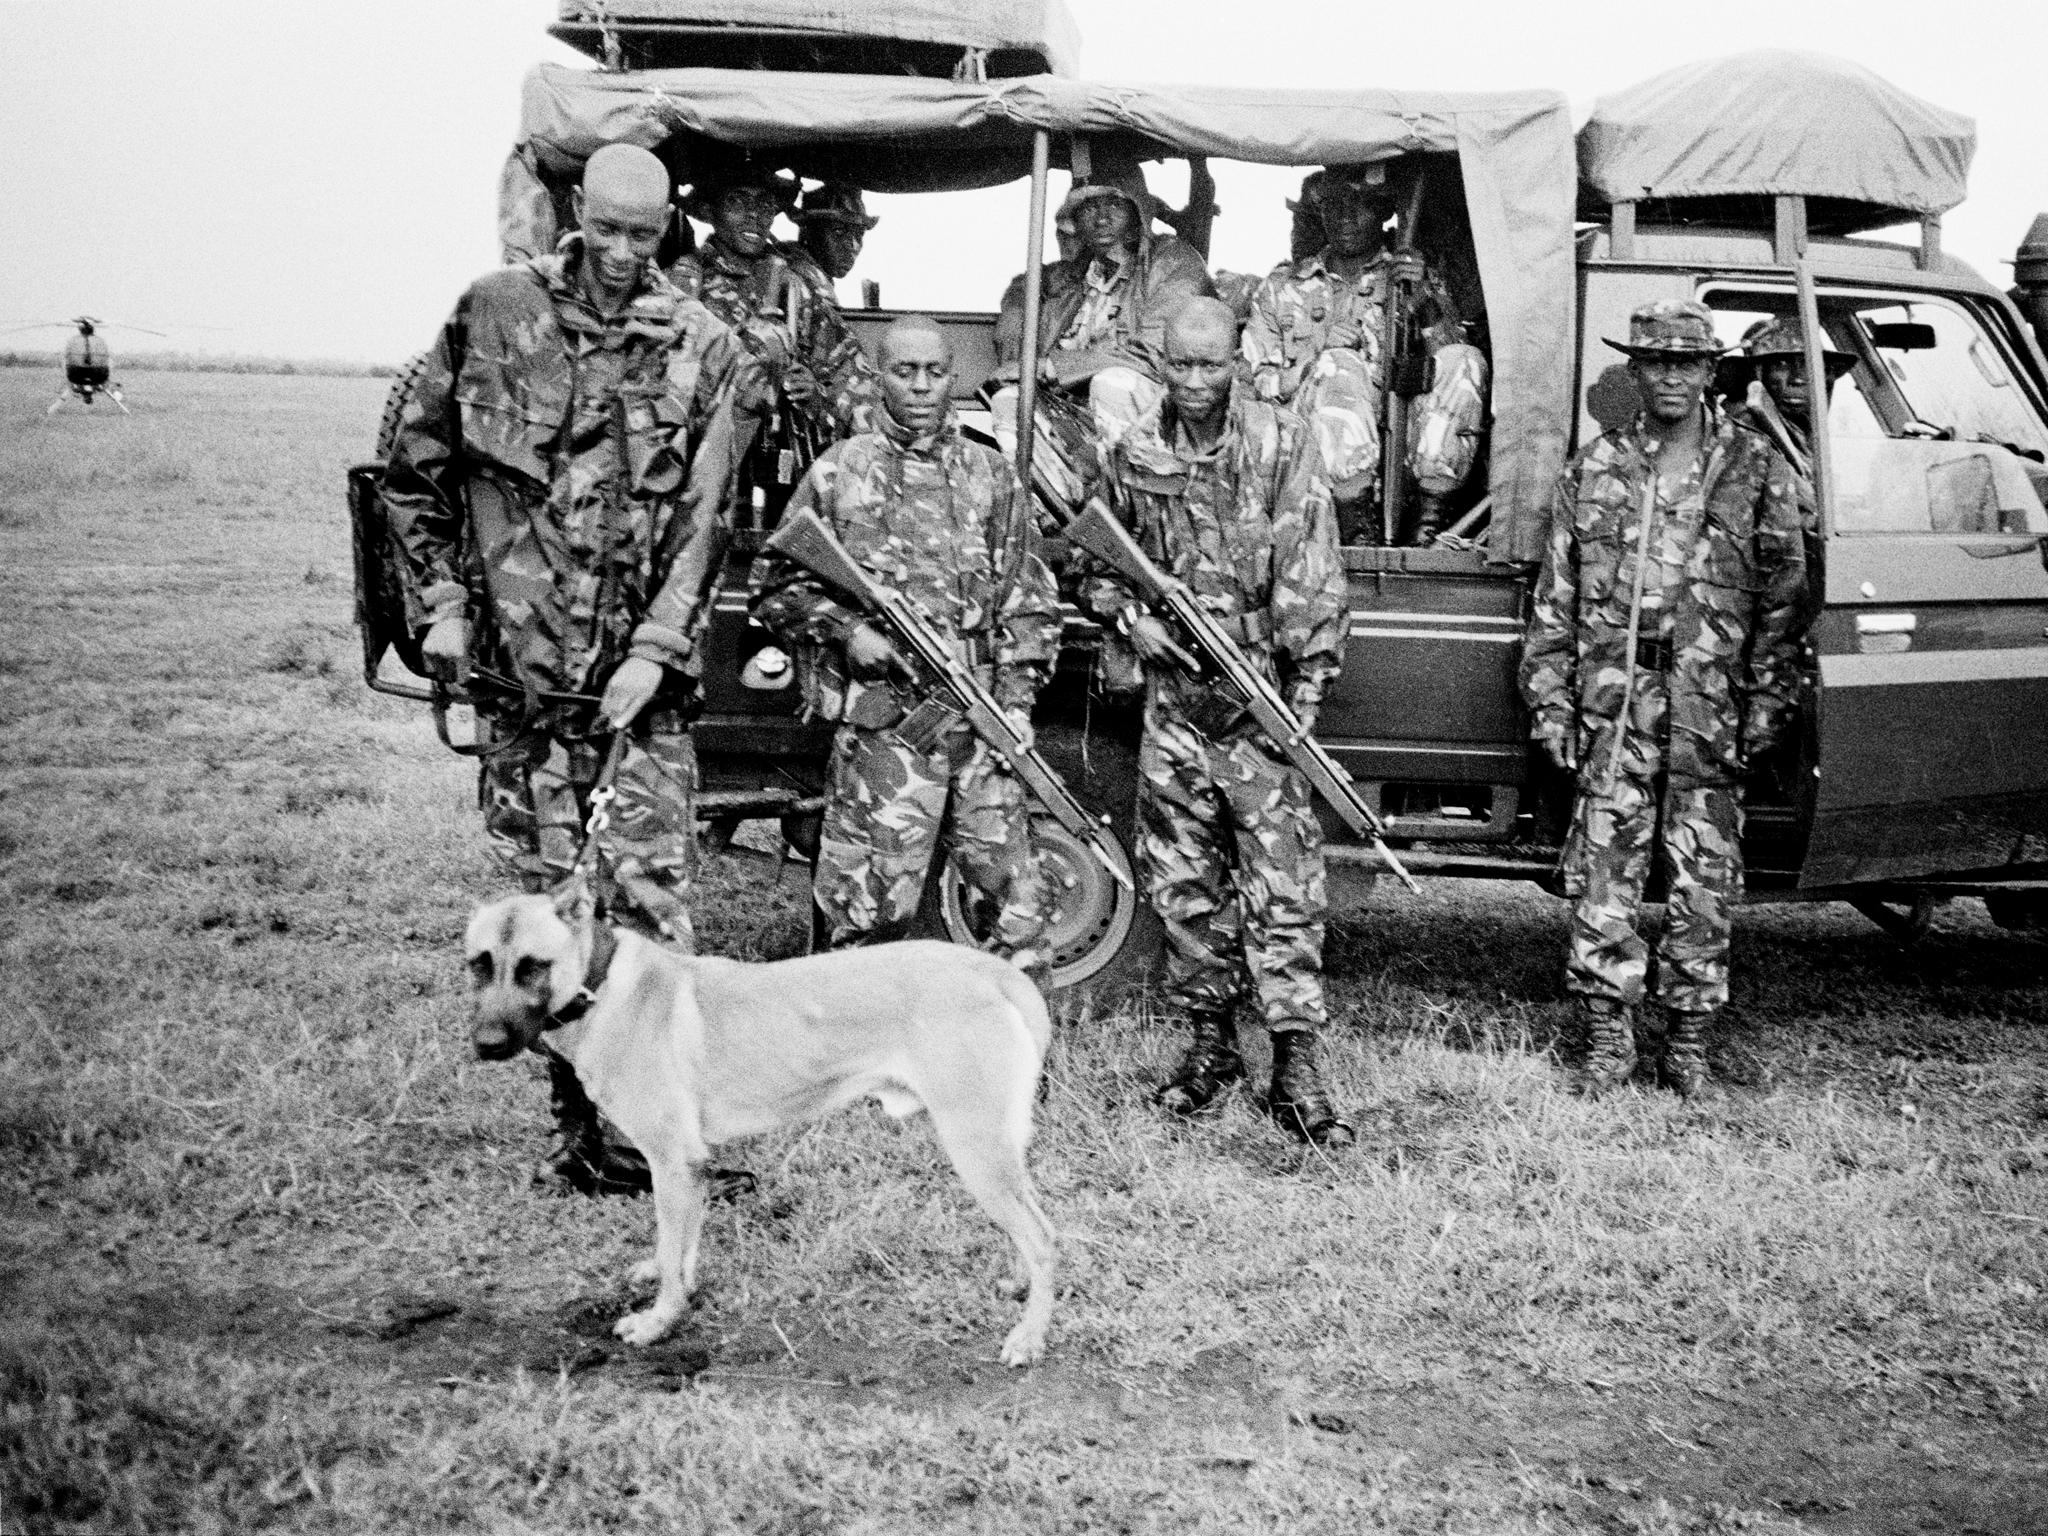 A unit from one of the dog teams supported by Space for Giants in Kenya waits to demonstrate their operational skills to the attending delegates. More than 150 delegates attended in total and were shown a range of conservation activities and approaches by experts.